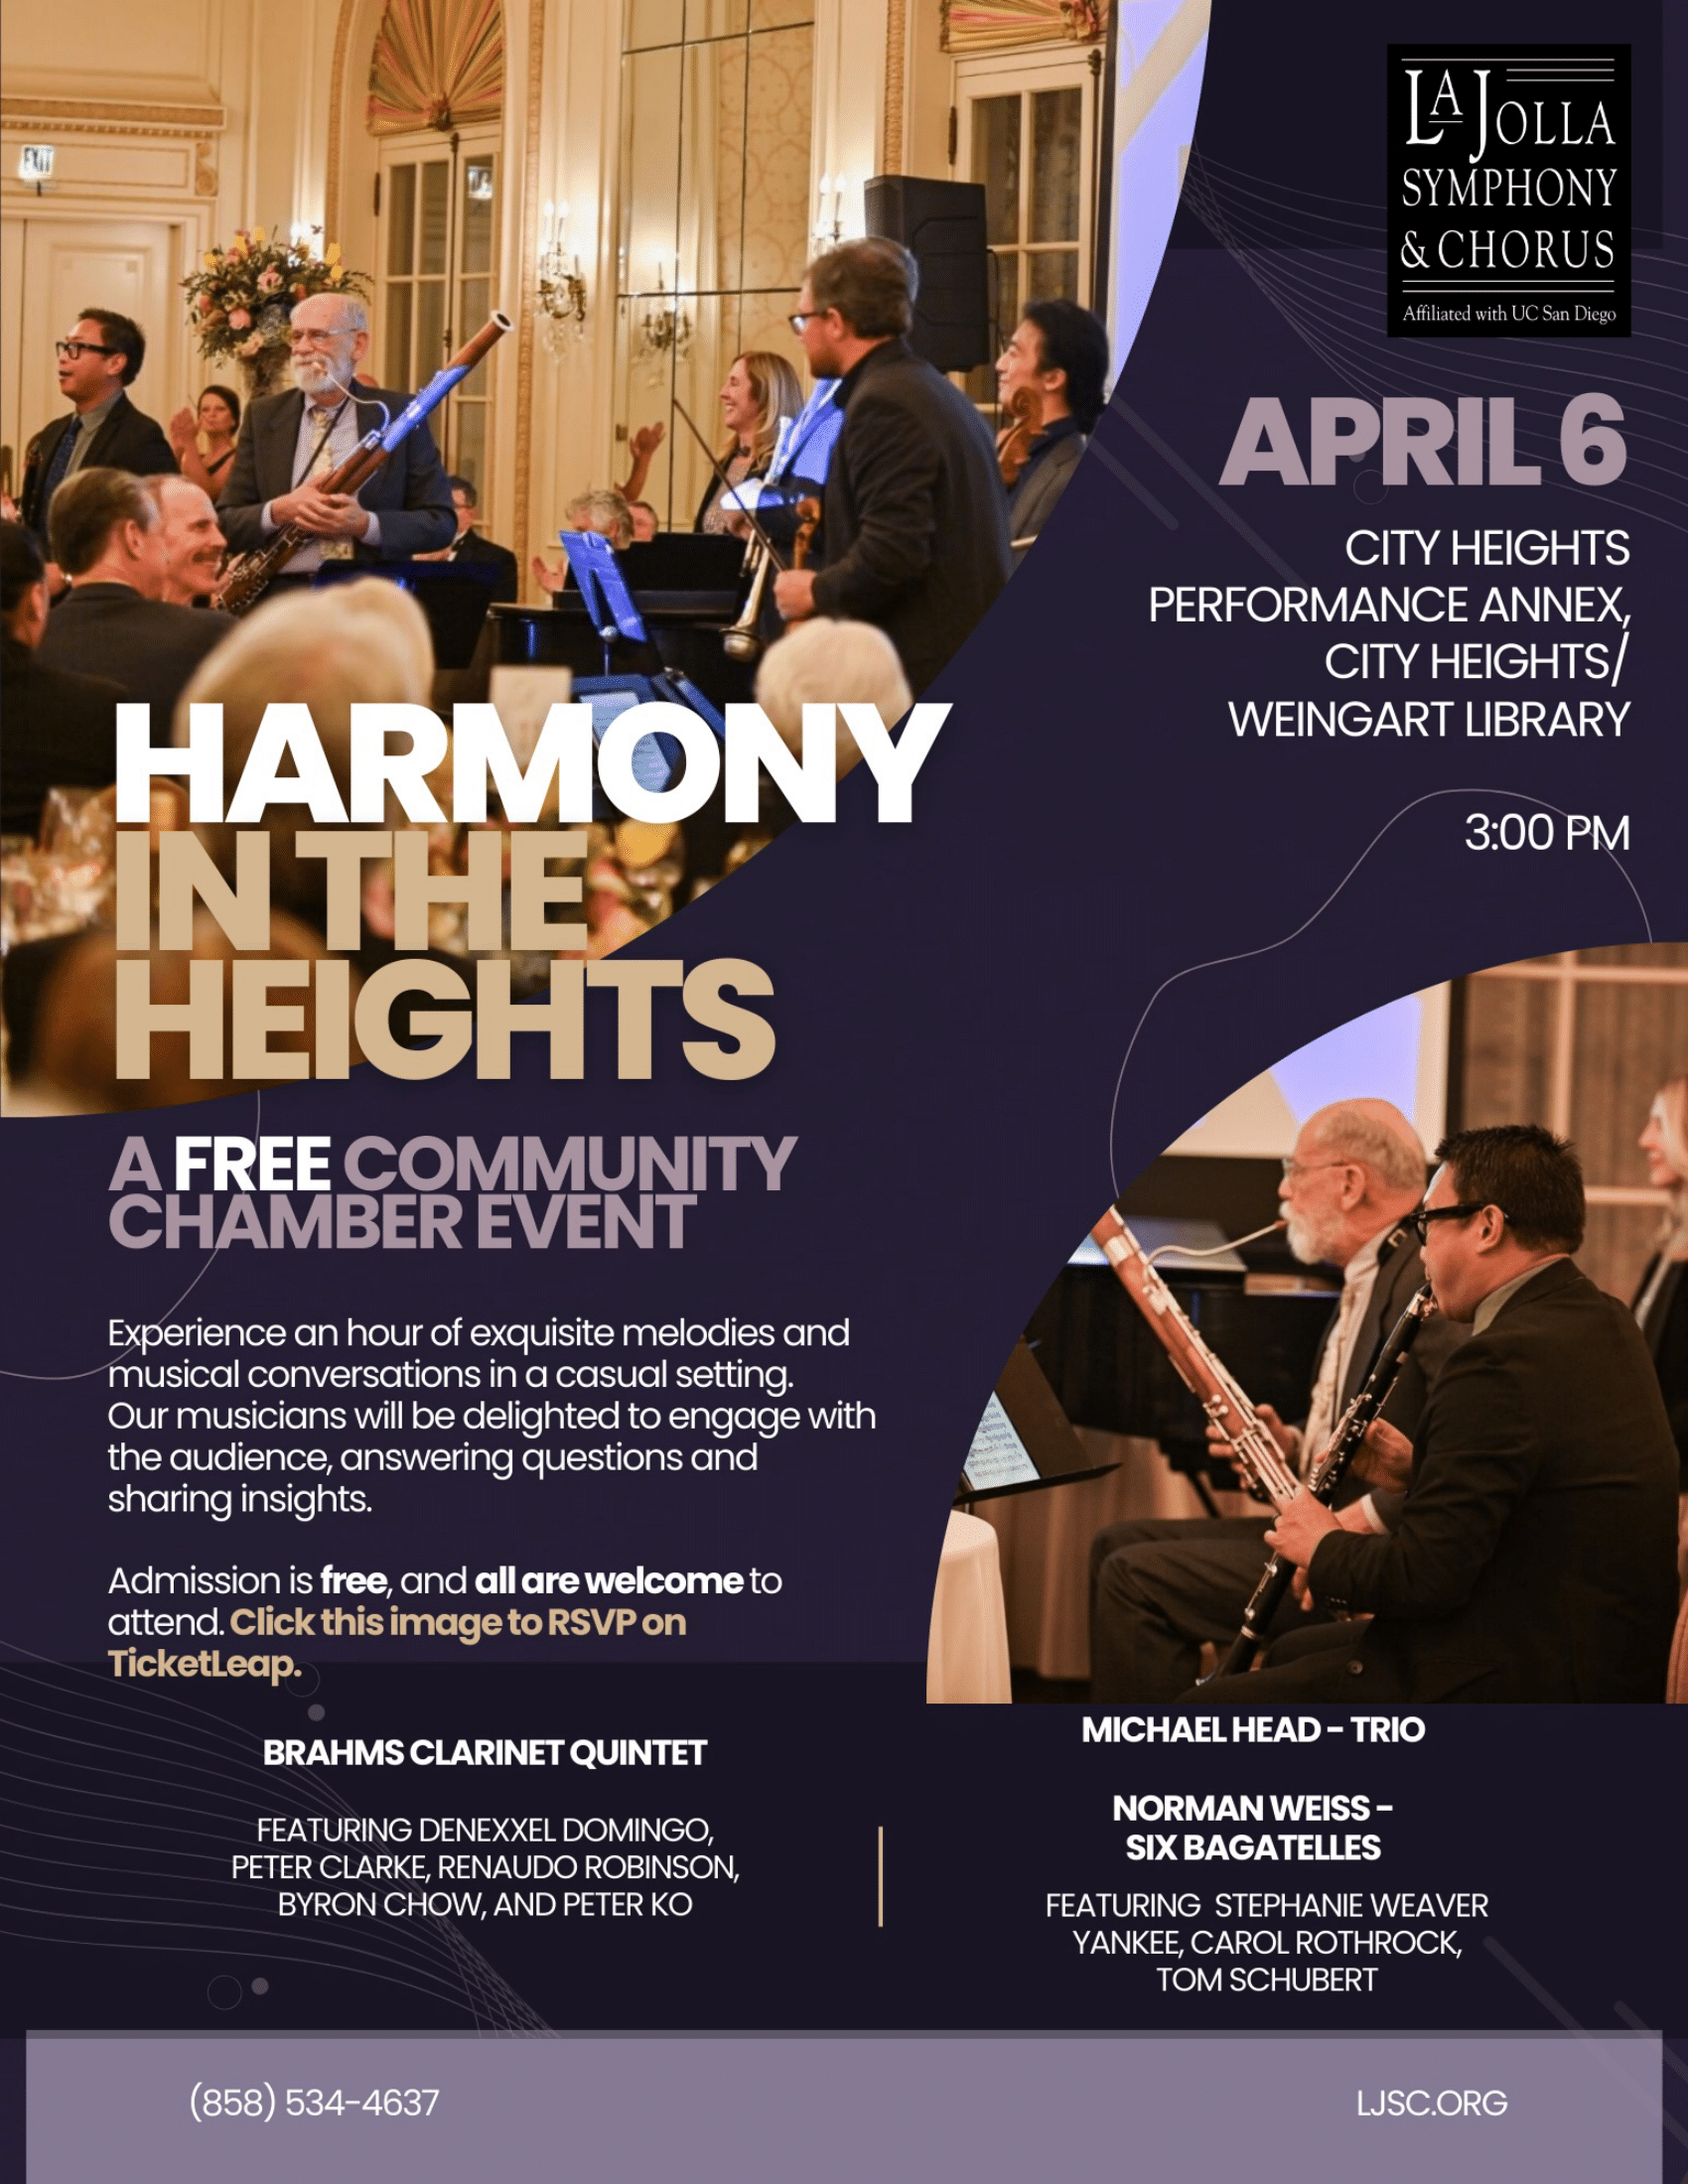 Harmony in the Heights: A Free Community Chamber Music Event